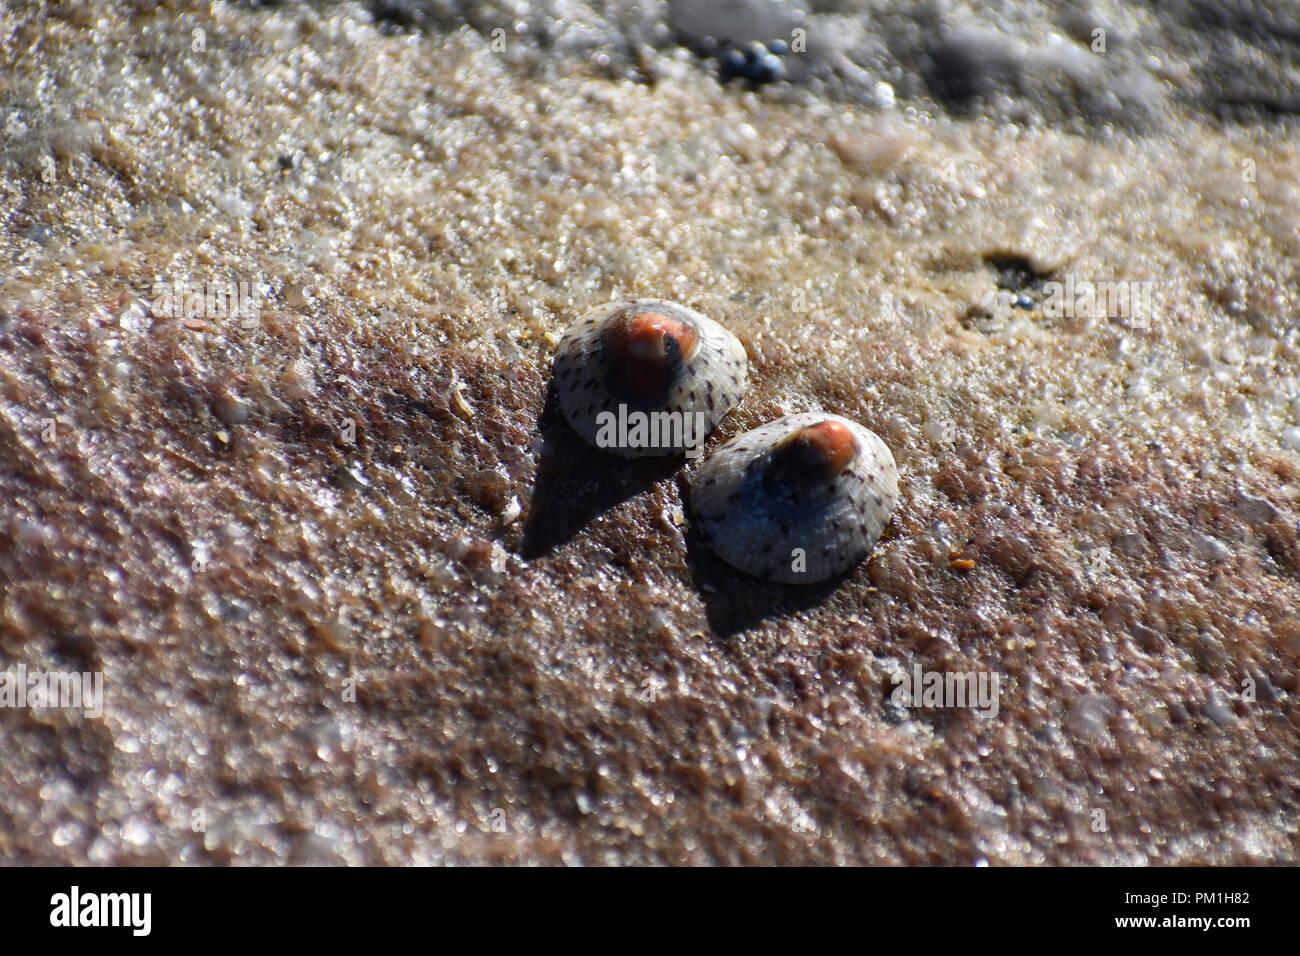 Pair Of Spotted Limpet Shell (eoacmaea sp.) On A Beach Rock Surface Stock Photo